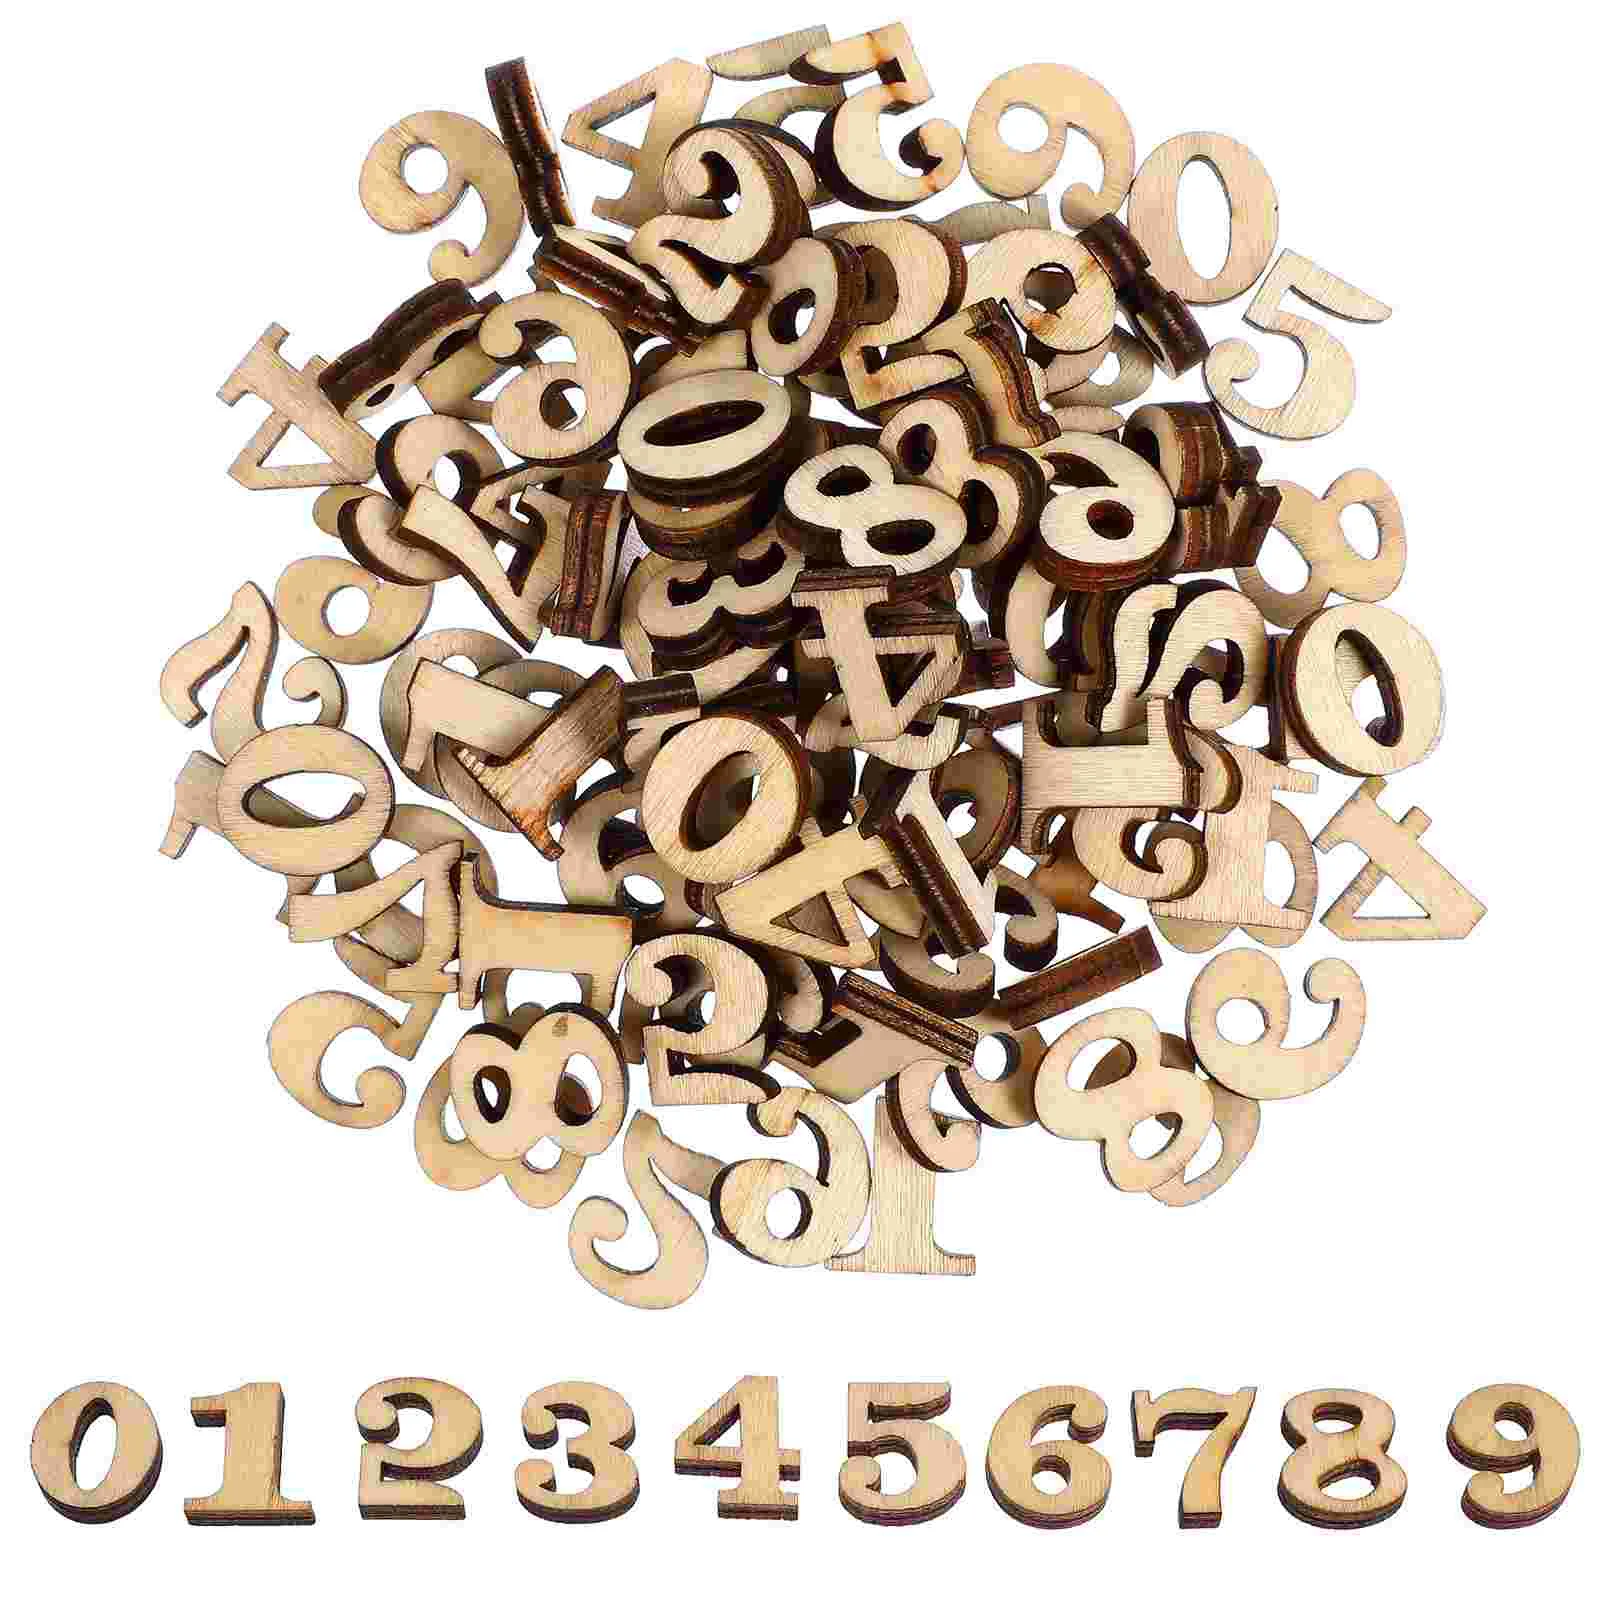 

Numbers Wooden Crafts Wood Diy Blank Letters Number Discs Alphabet Handmade Displays Embellishments Decoration Decors Mini